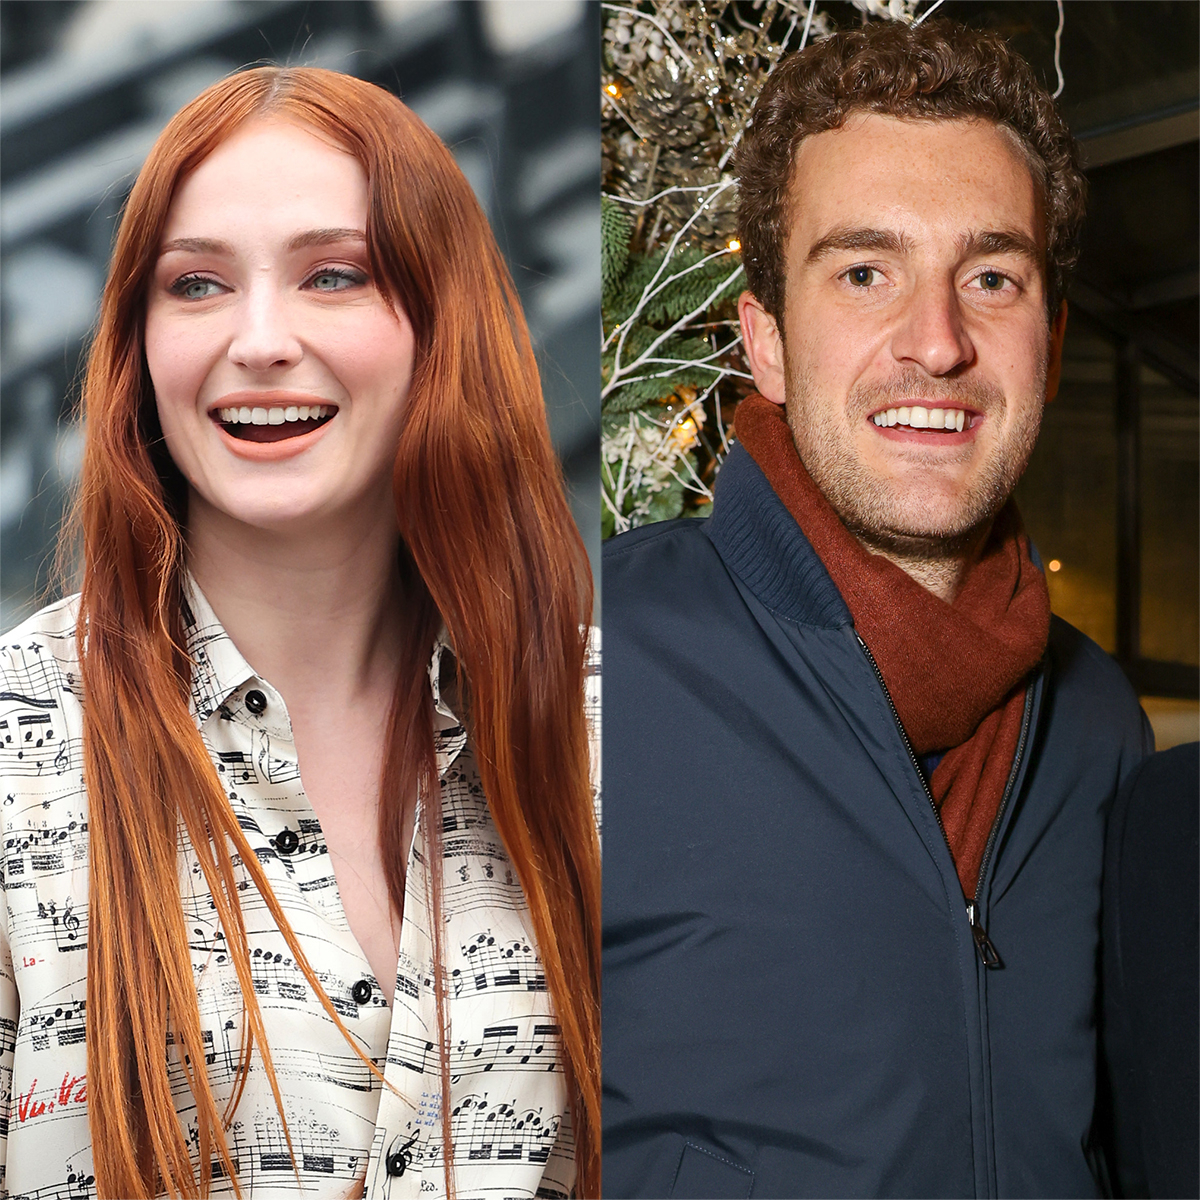 Sophie Turner and Peregrine Pearson Hit a Major Relationship Milestone